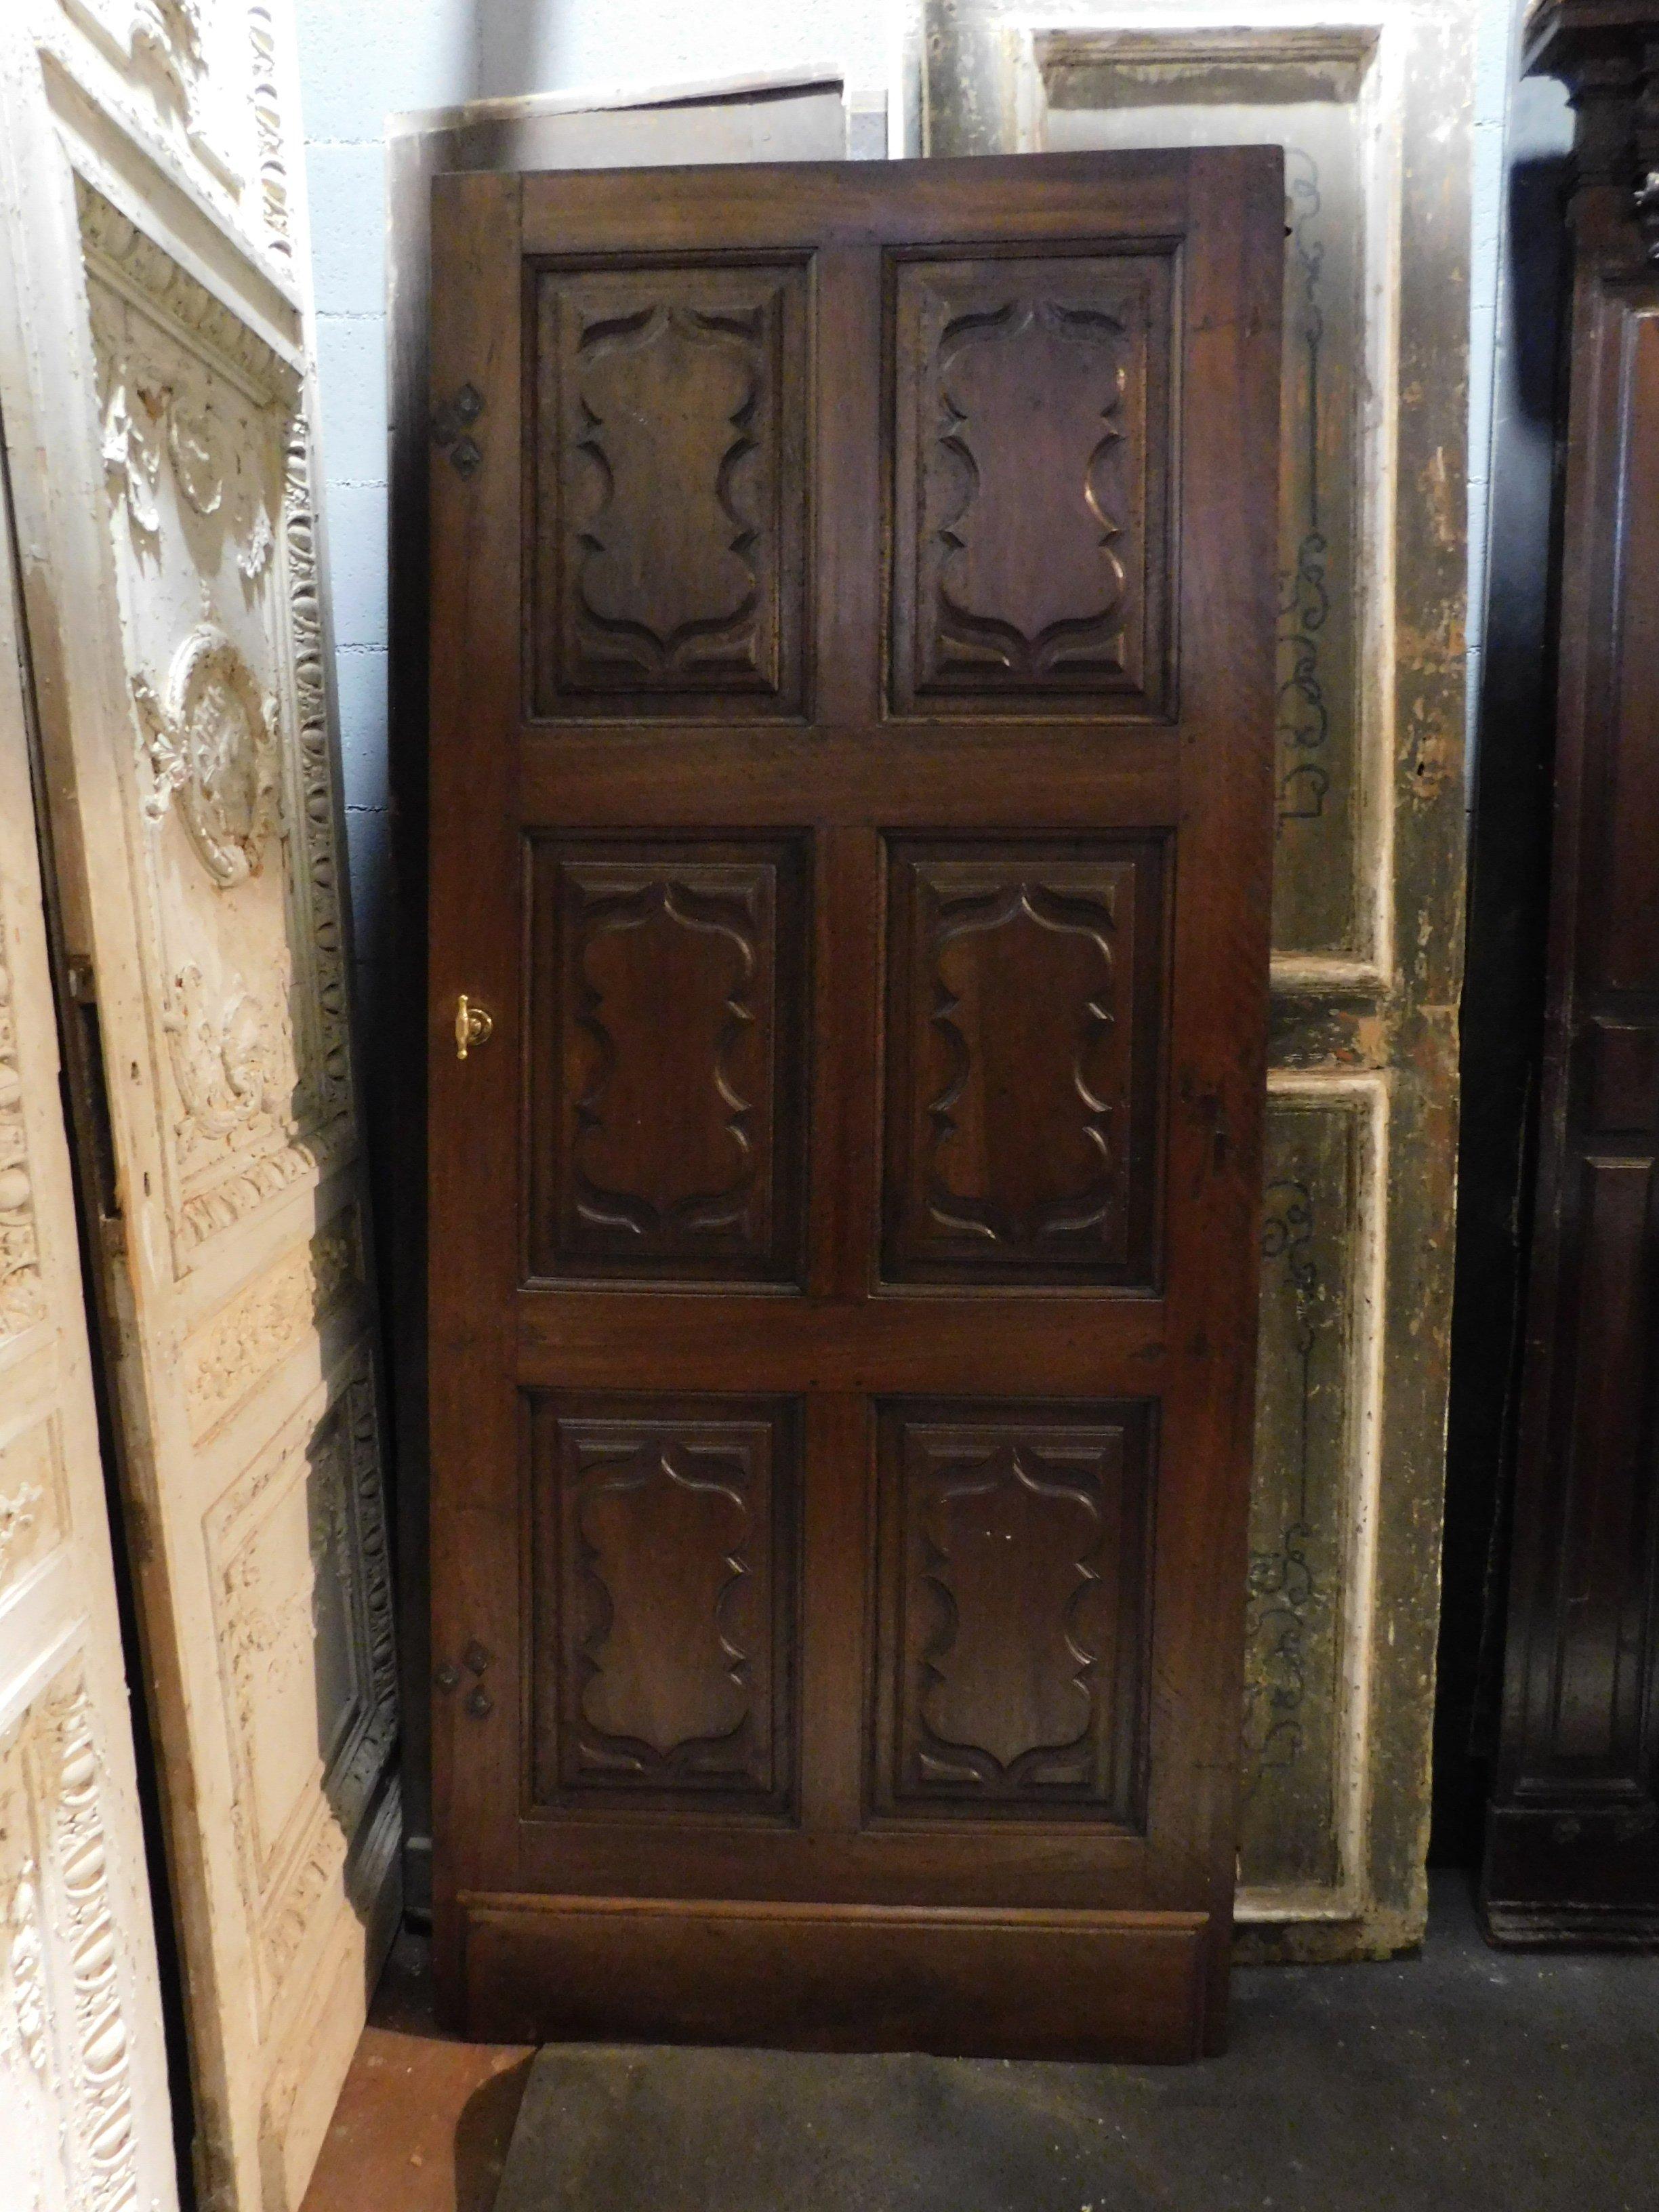 Hand-Carved Antique Walnut Door with Six Carved Panels, 18th Century, Italy